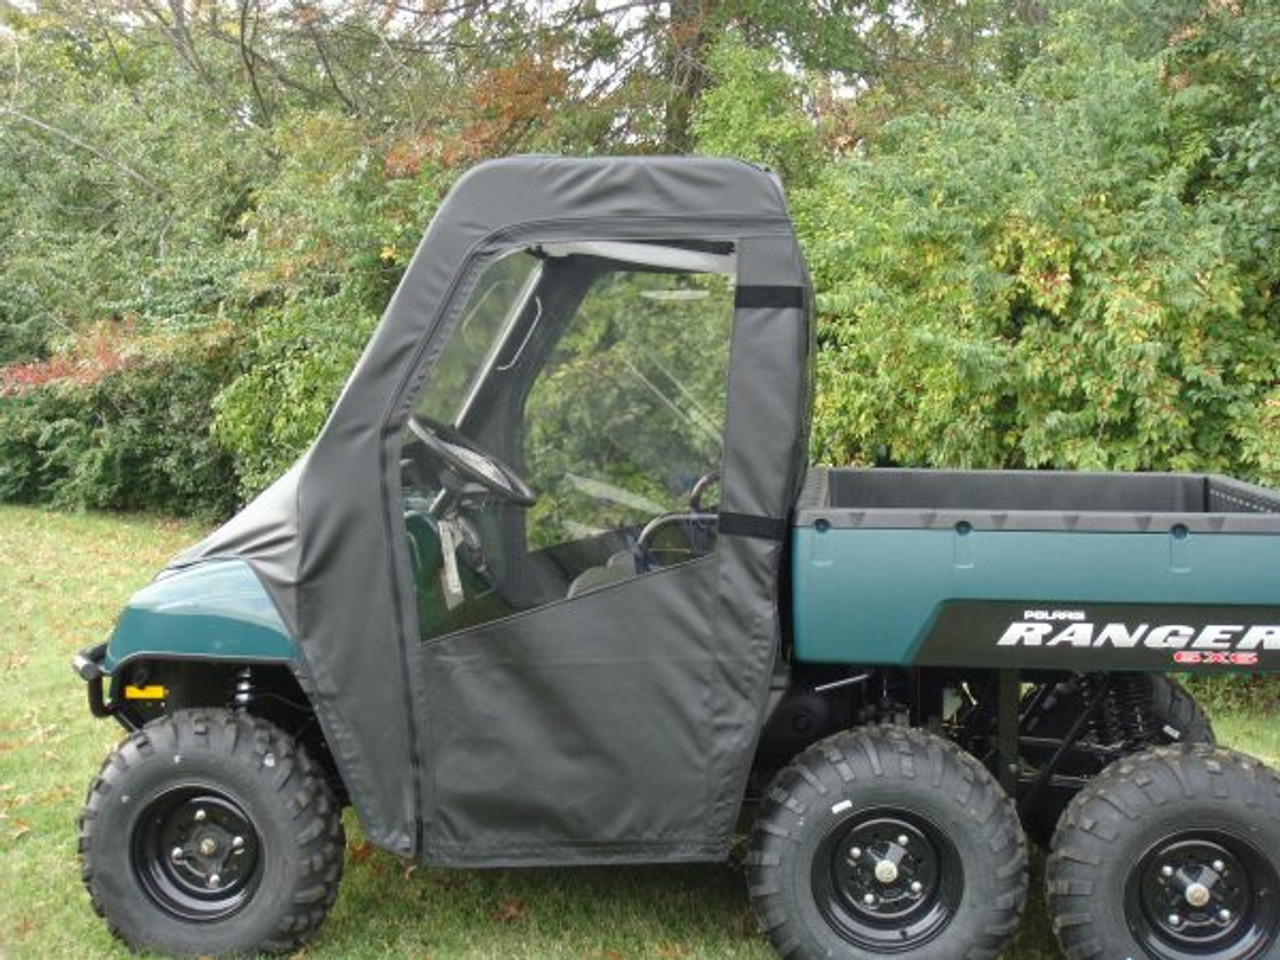 3 Star side x side Polaris Ranger 500 and 700 soft full cab enclosure with vinyl windshield side view